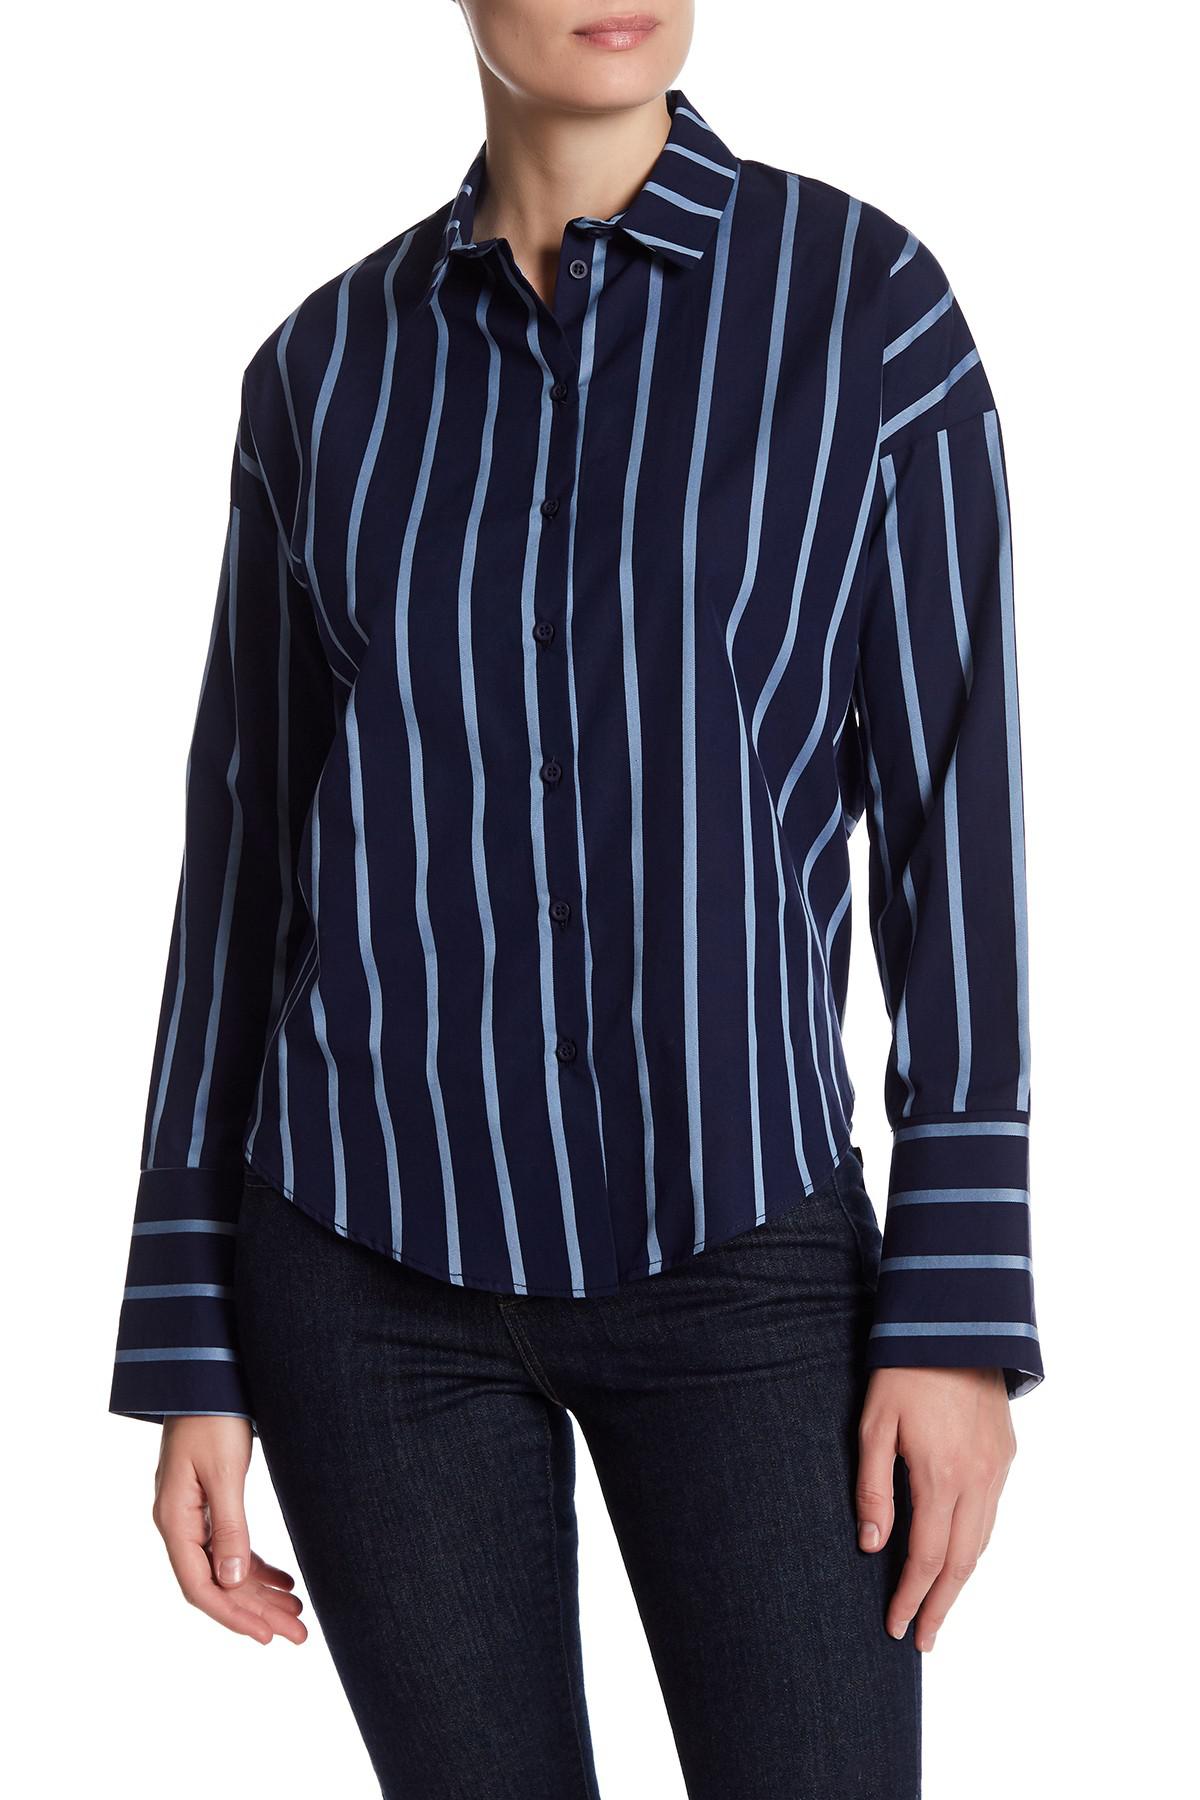 Lyst - Topshop Striped Tie Back Shirt in Blue